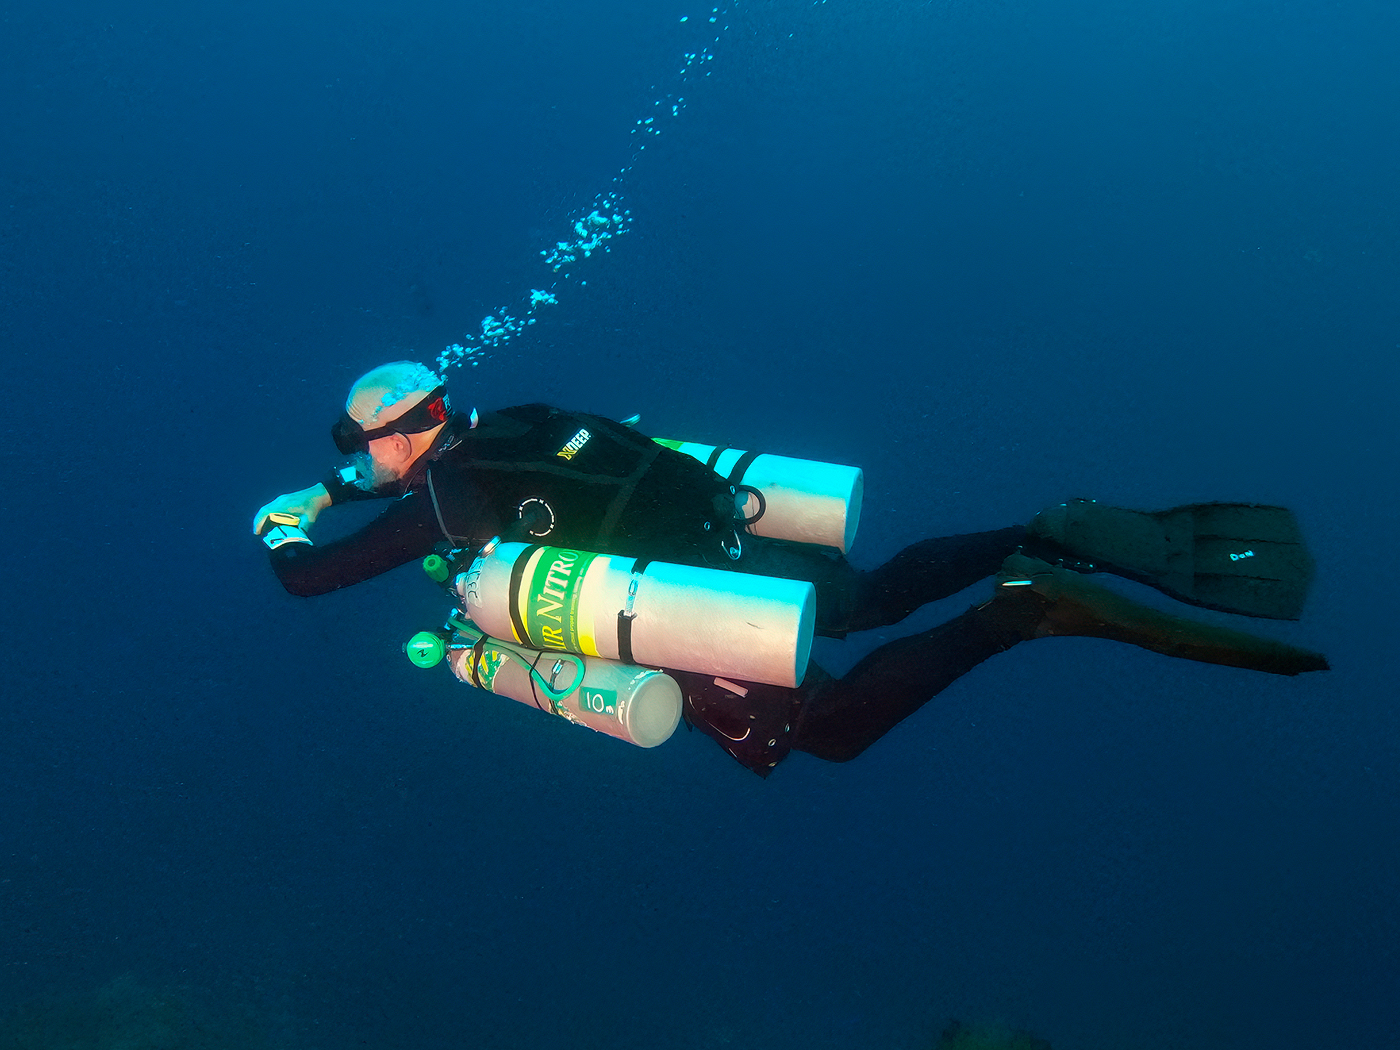 Getting into Technical Diving